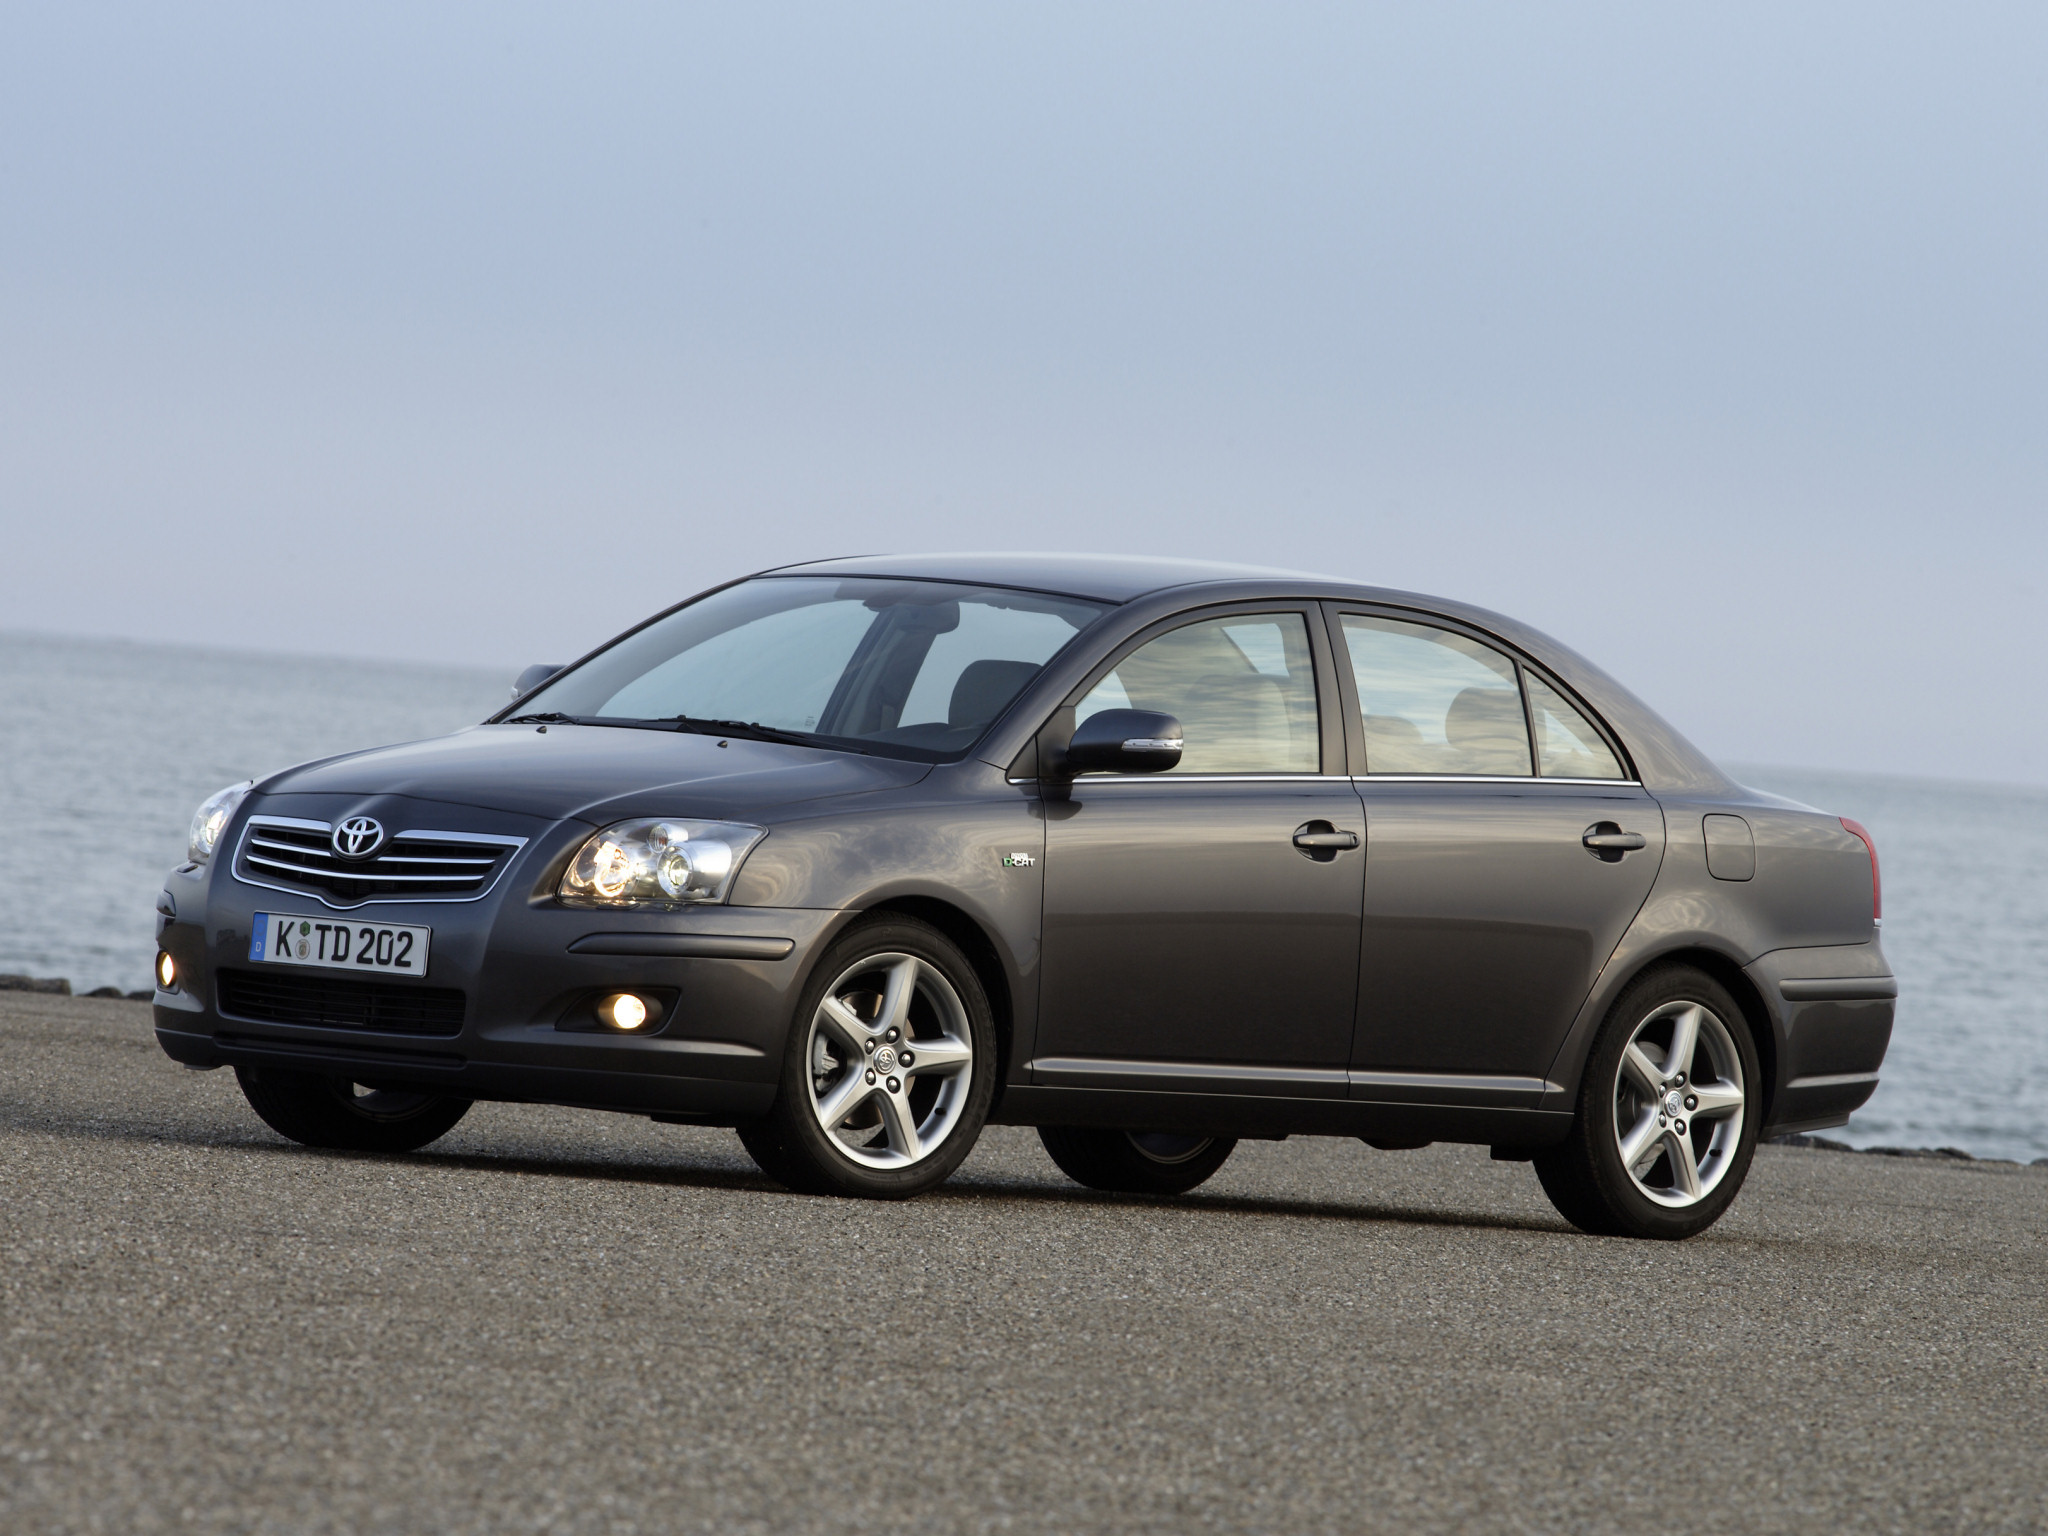 Car in pictures car photo gallery » Toyota Avensis